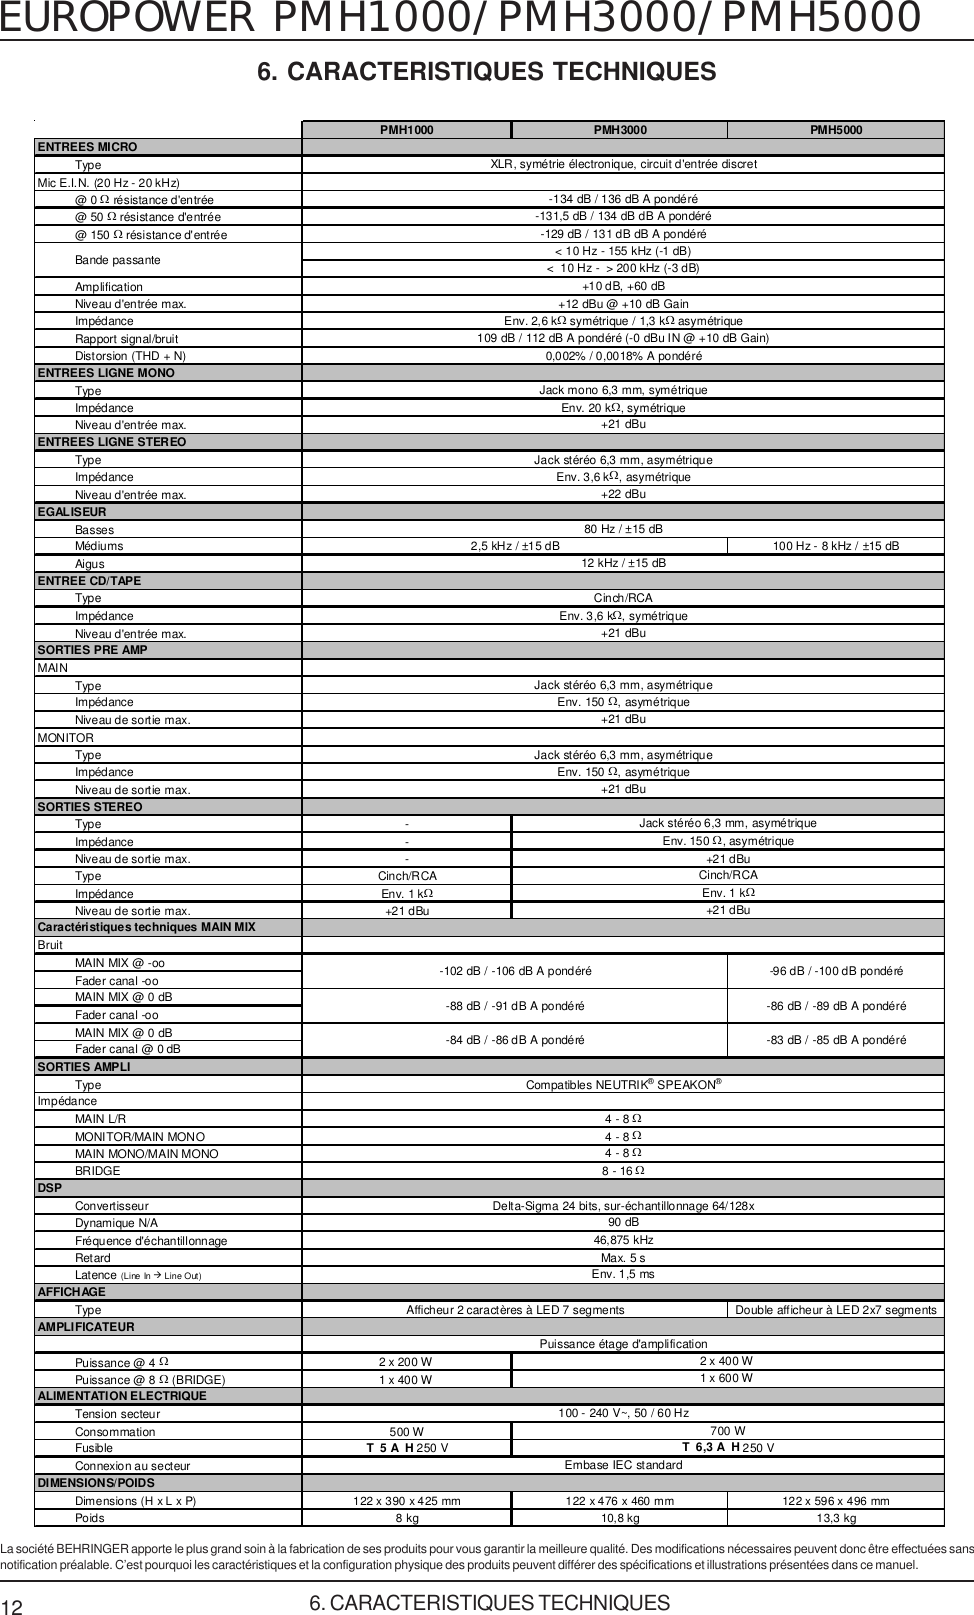 Page 12 of 12 - Behringer PMH1000 User Manual (French) P0115 M FR